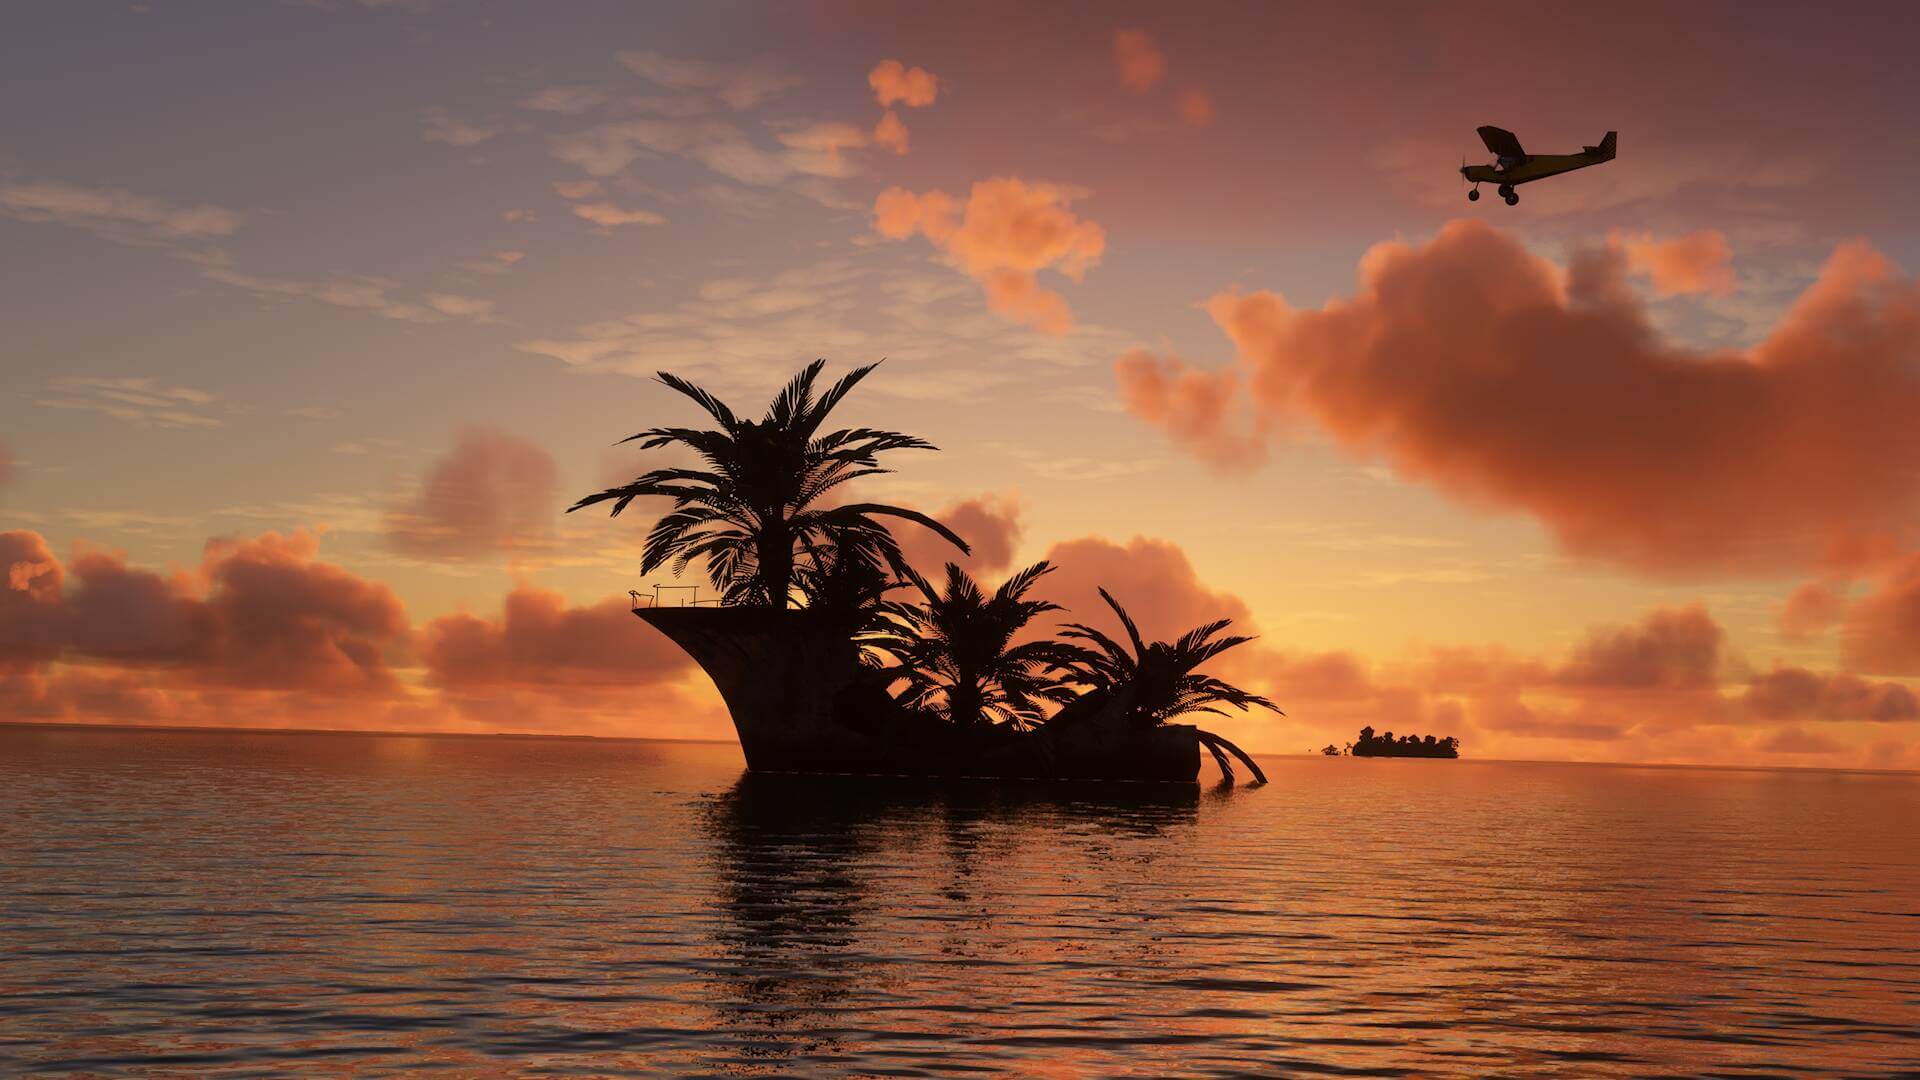 A single engine prop plane flies over a very small island at sunset. The island has several palm trees growing on it.